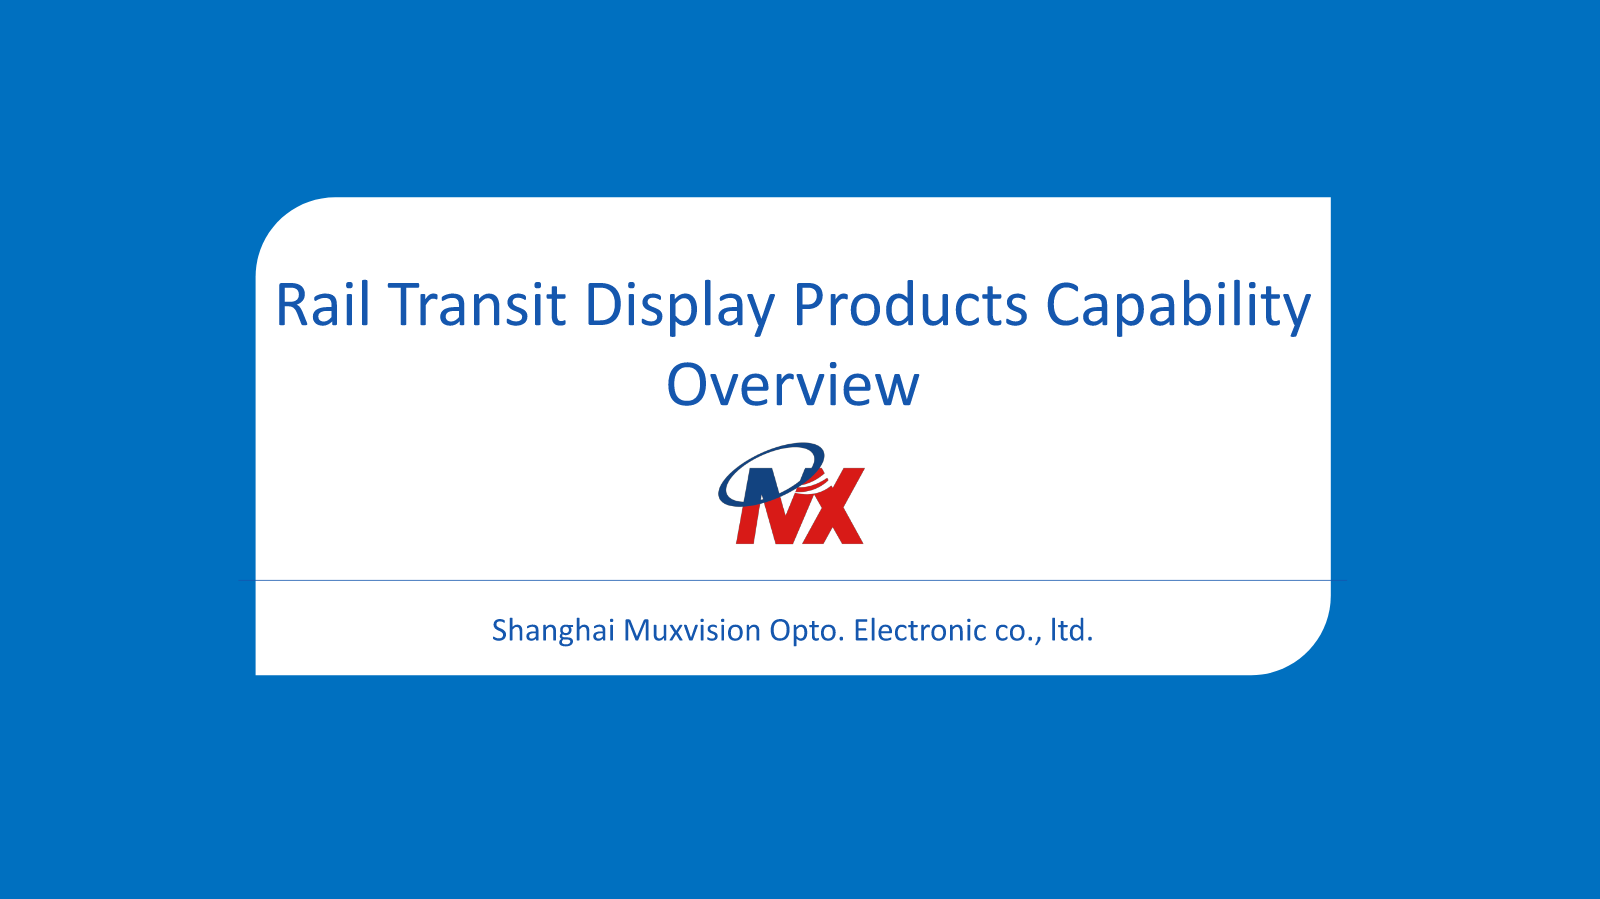 Muxvision Rail Transit Display Capability Overview